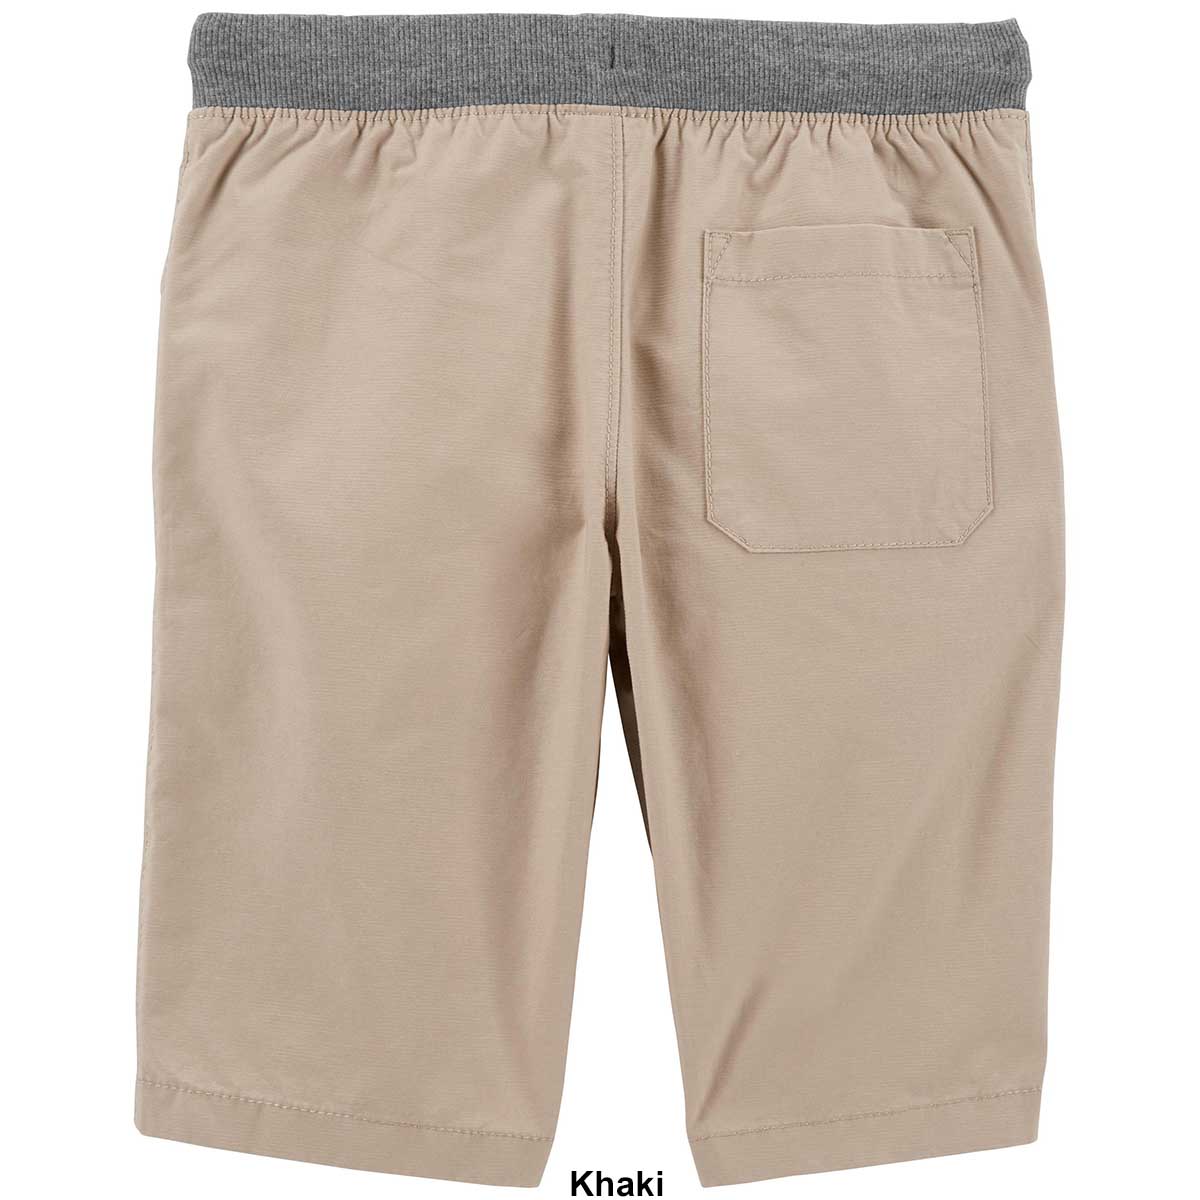 Boys (4-7) Carter's(R) Pull On Solid Shorts